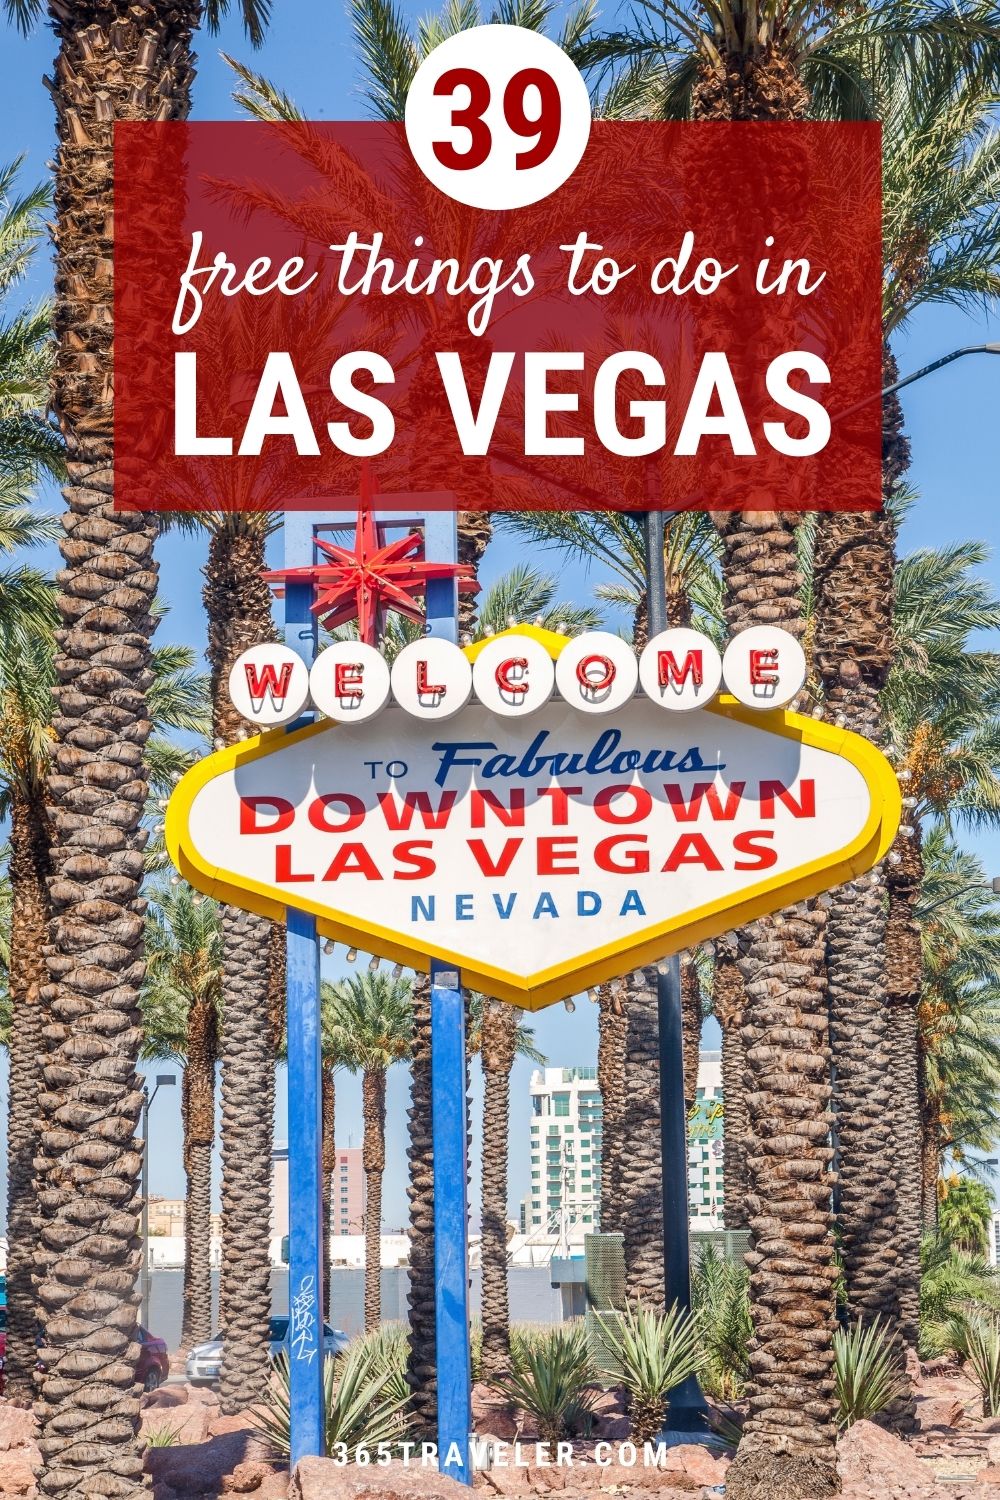 39 AMAZING AND FREE THINGS TO DO IN LAS VEGAS